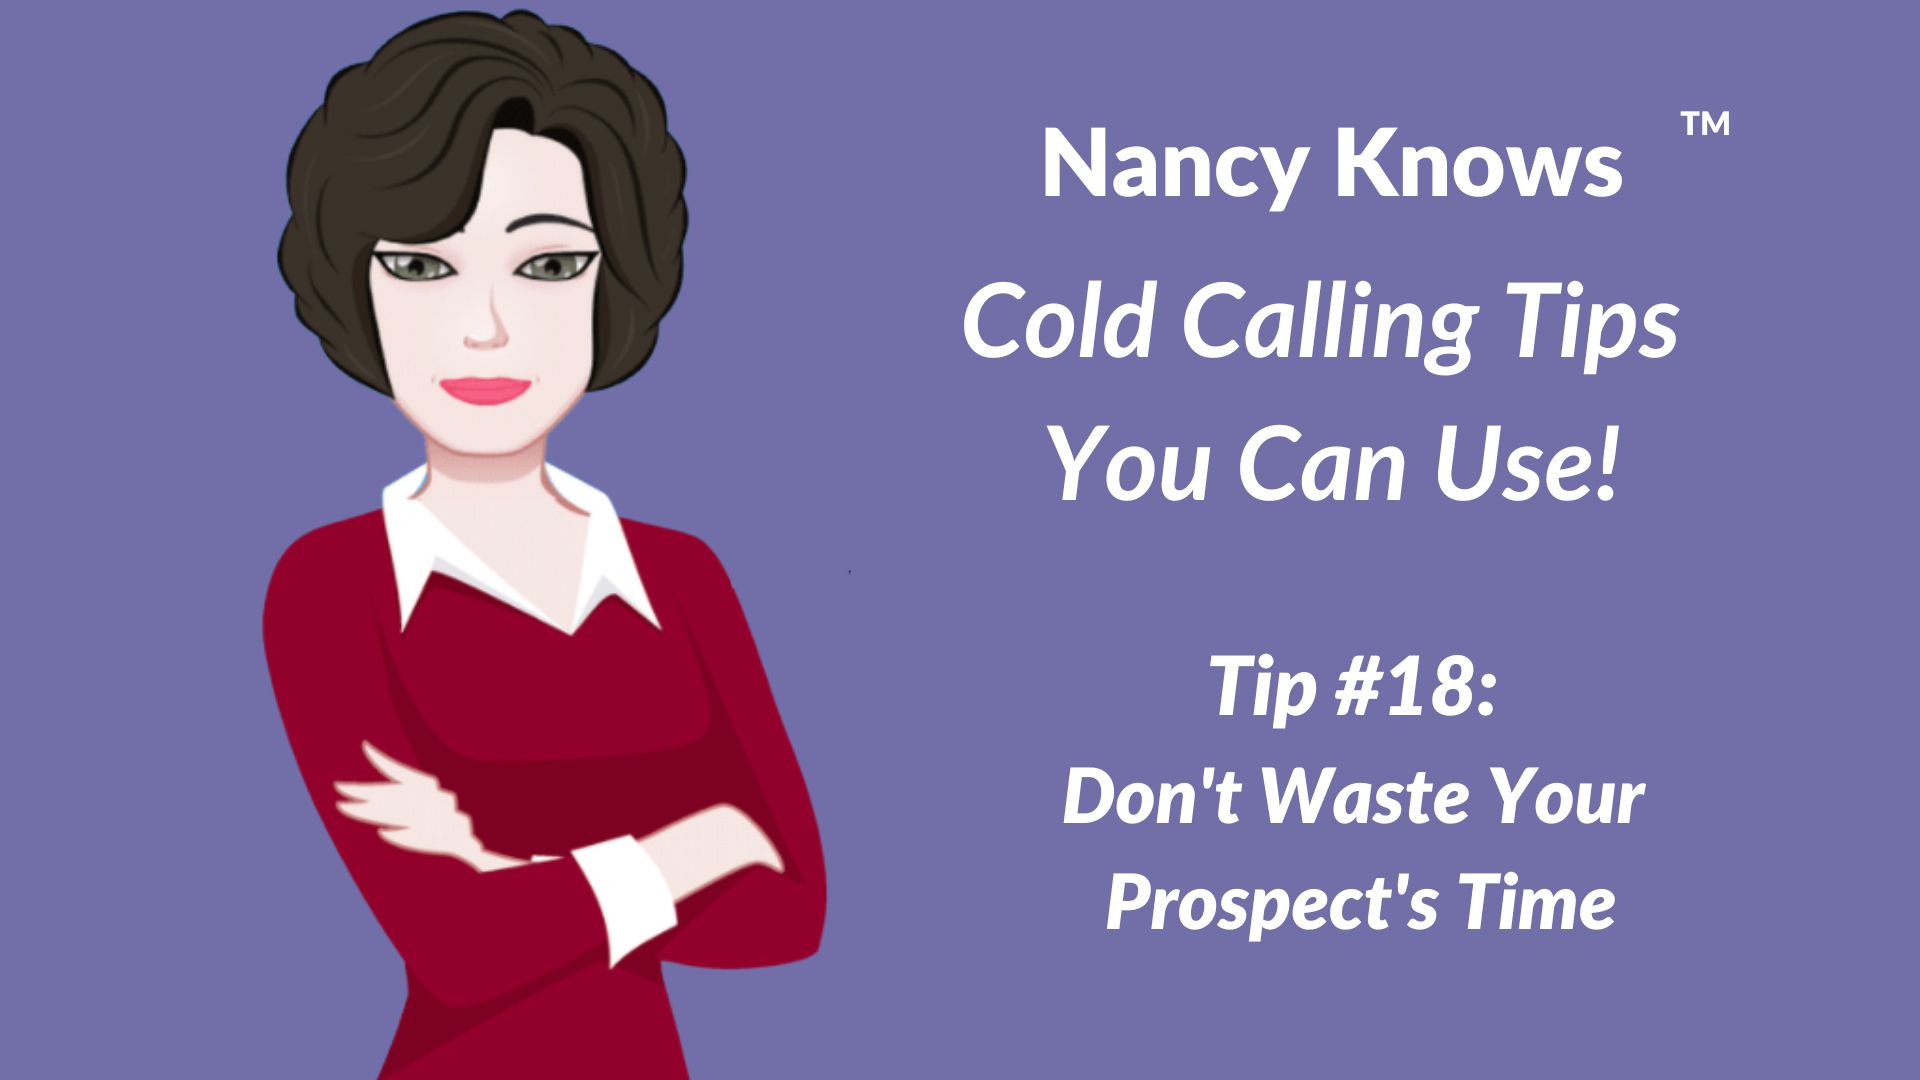 Nancy Knows #18: Don’t Waste Your Prospect’s Time